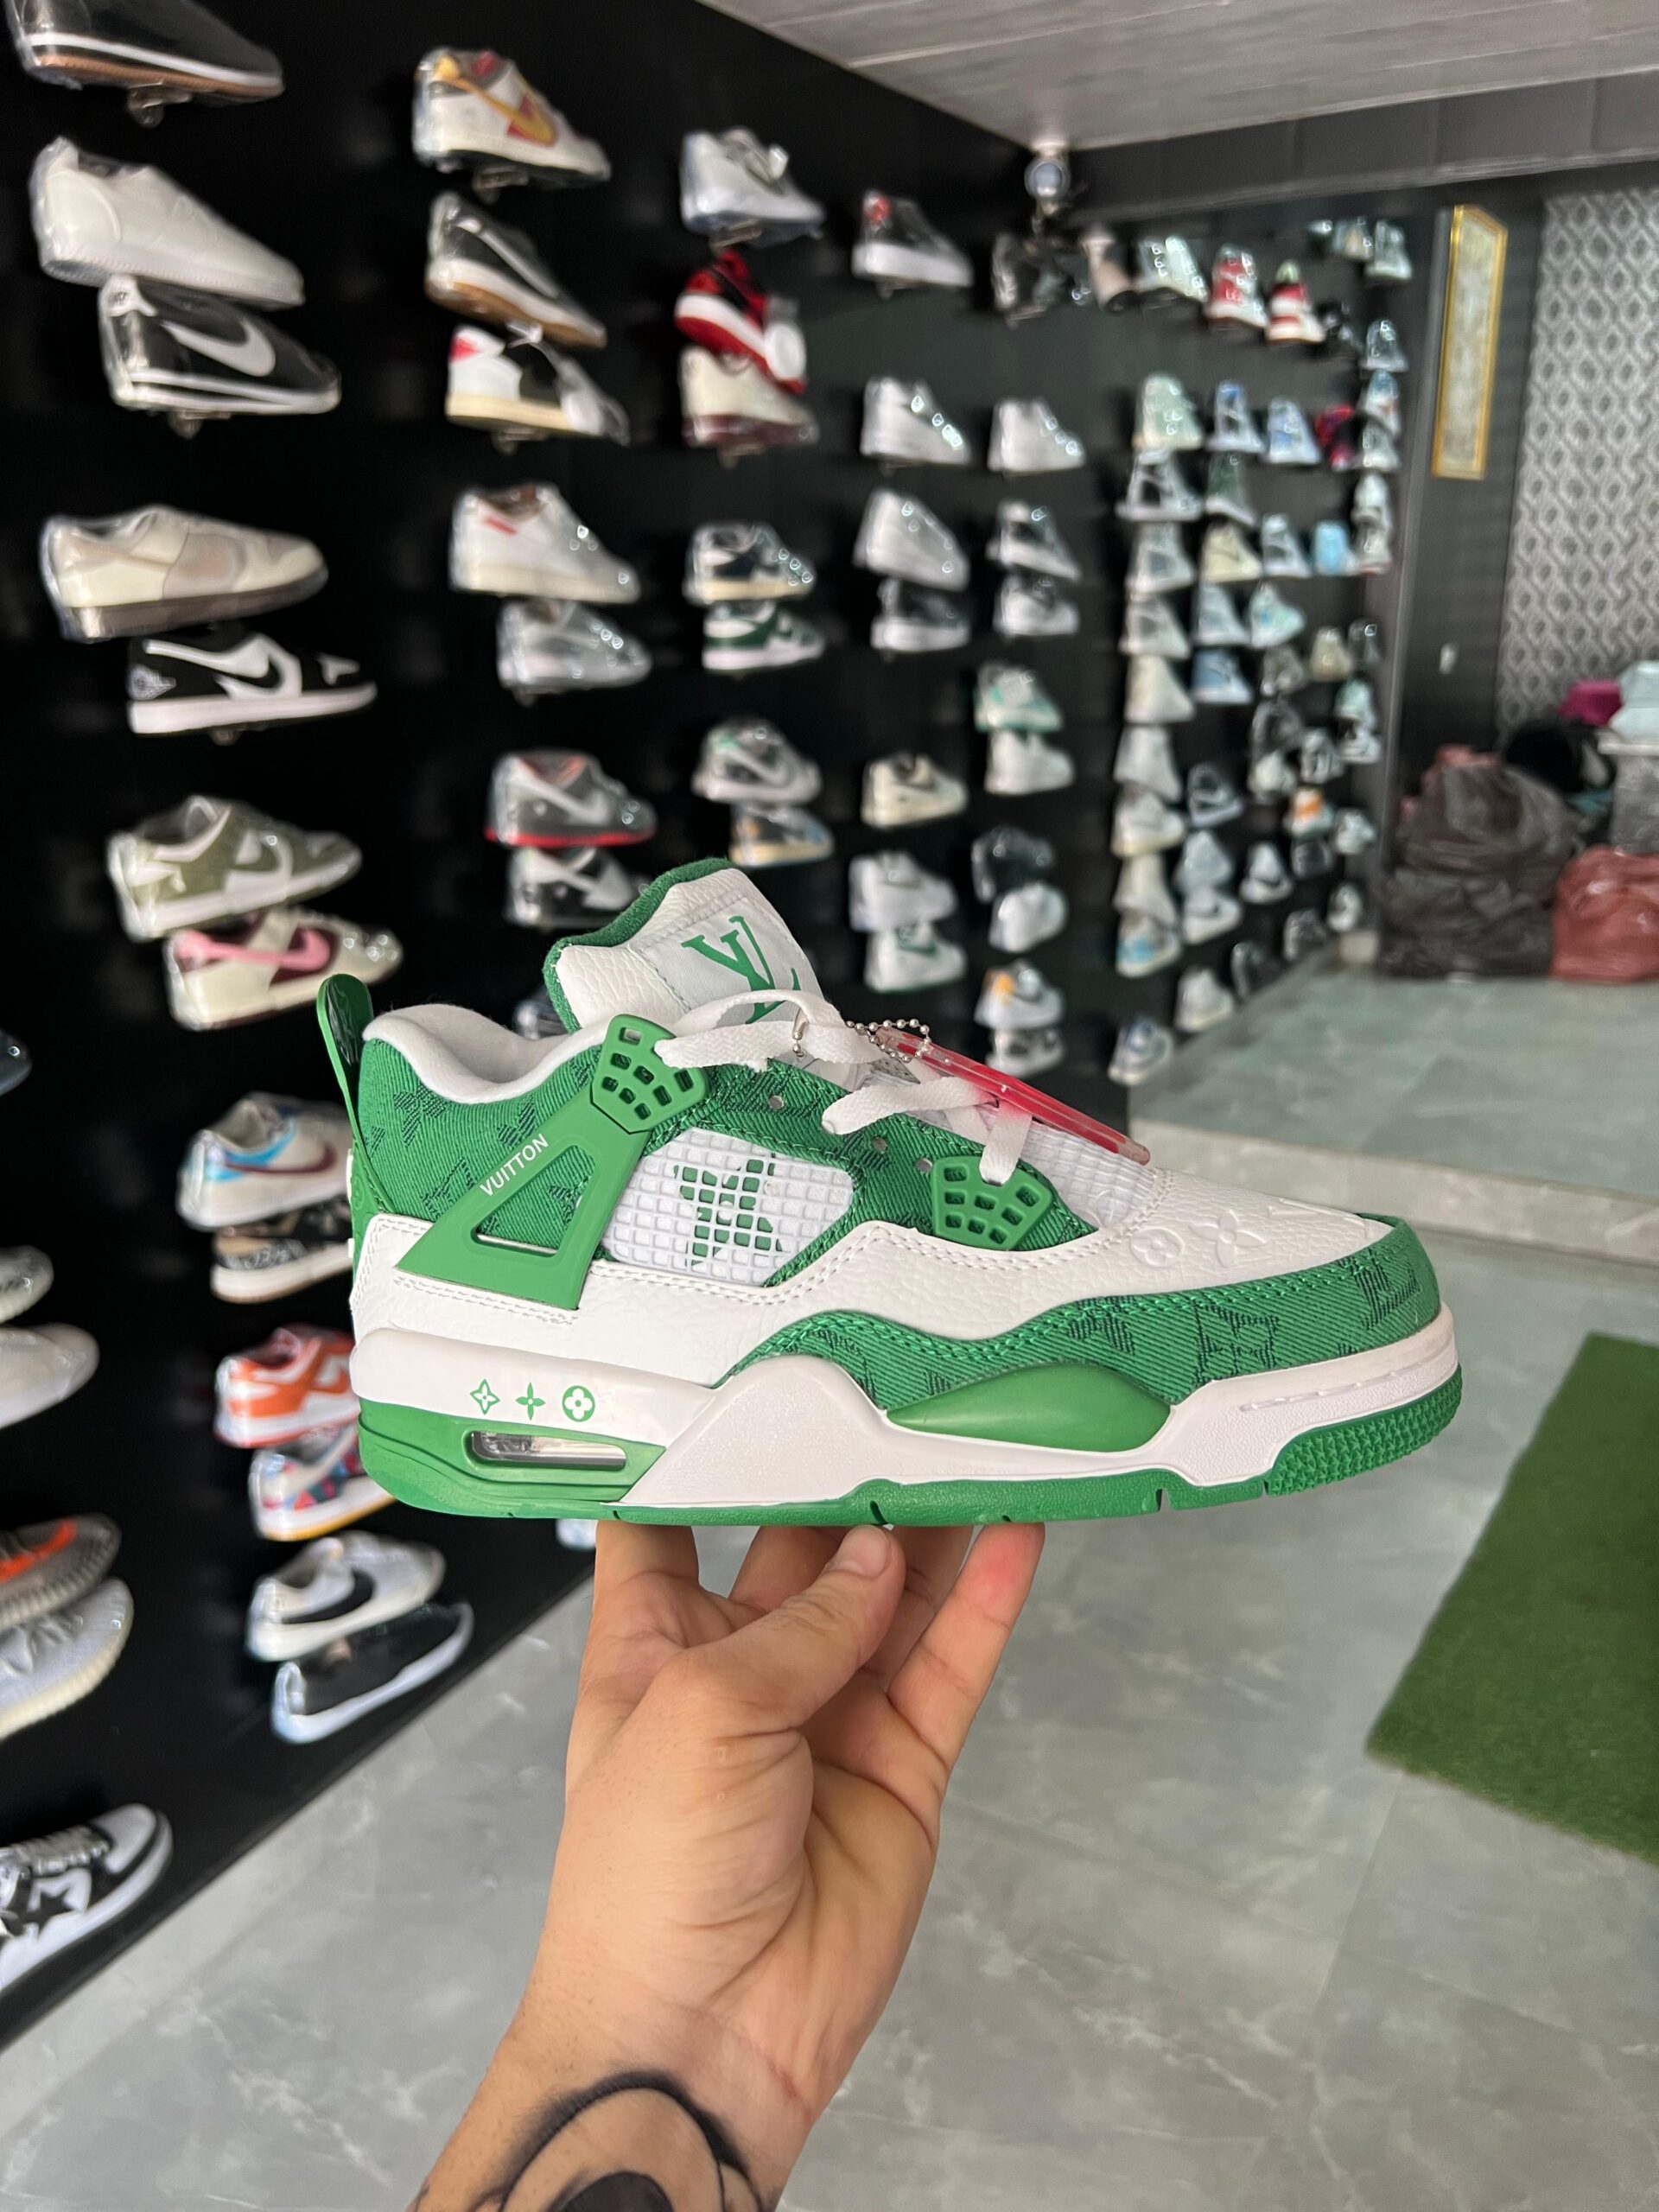 Retro 4 Lv Sneakers For Boys 4 Colors